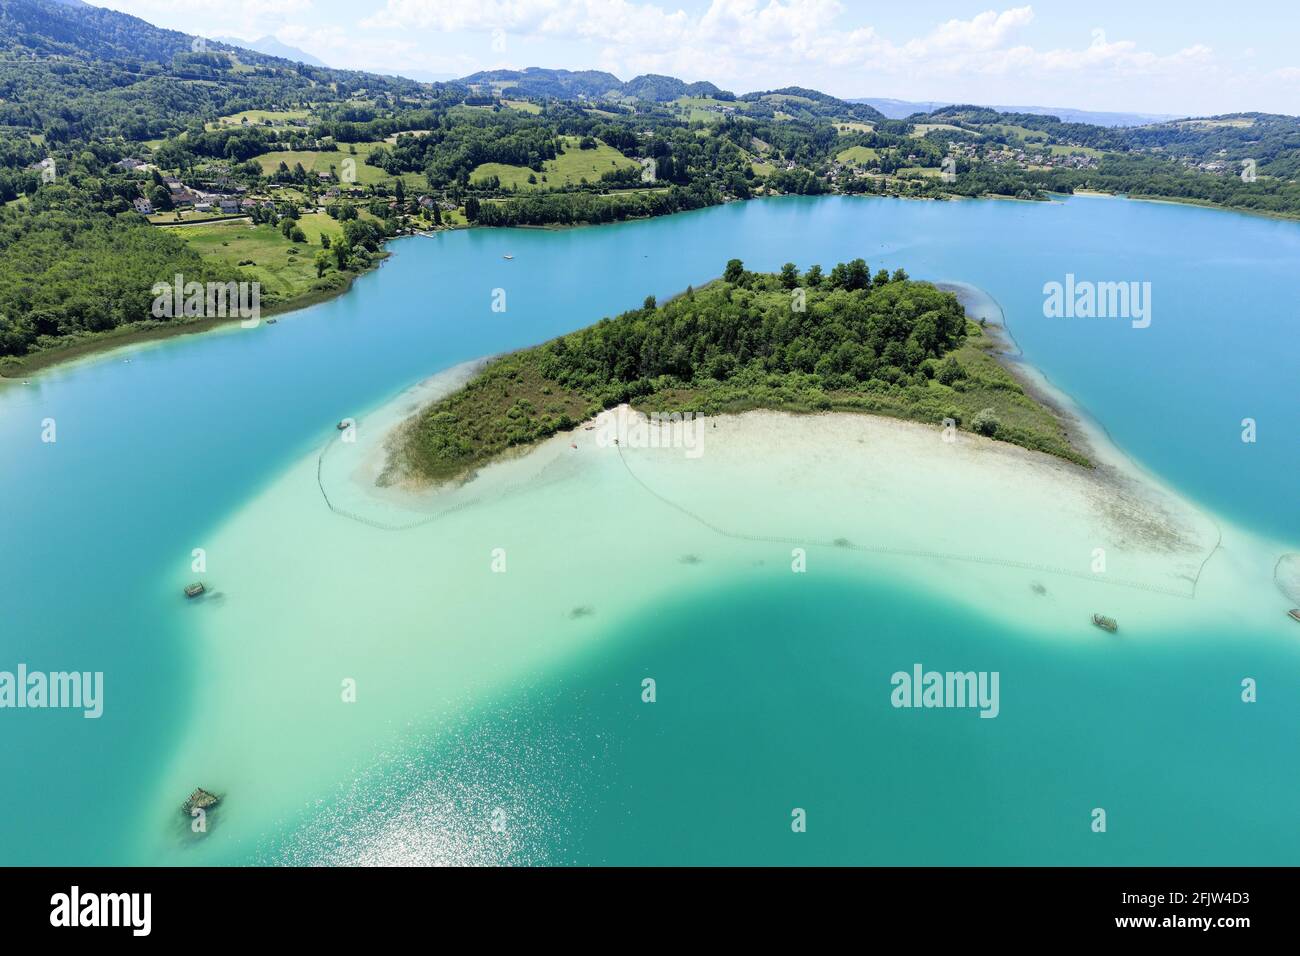 France, Savoie, Lac d'Aiguebelette, Grande ile, village of Lepin le Lac in the background (aerial view) Stock Photo